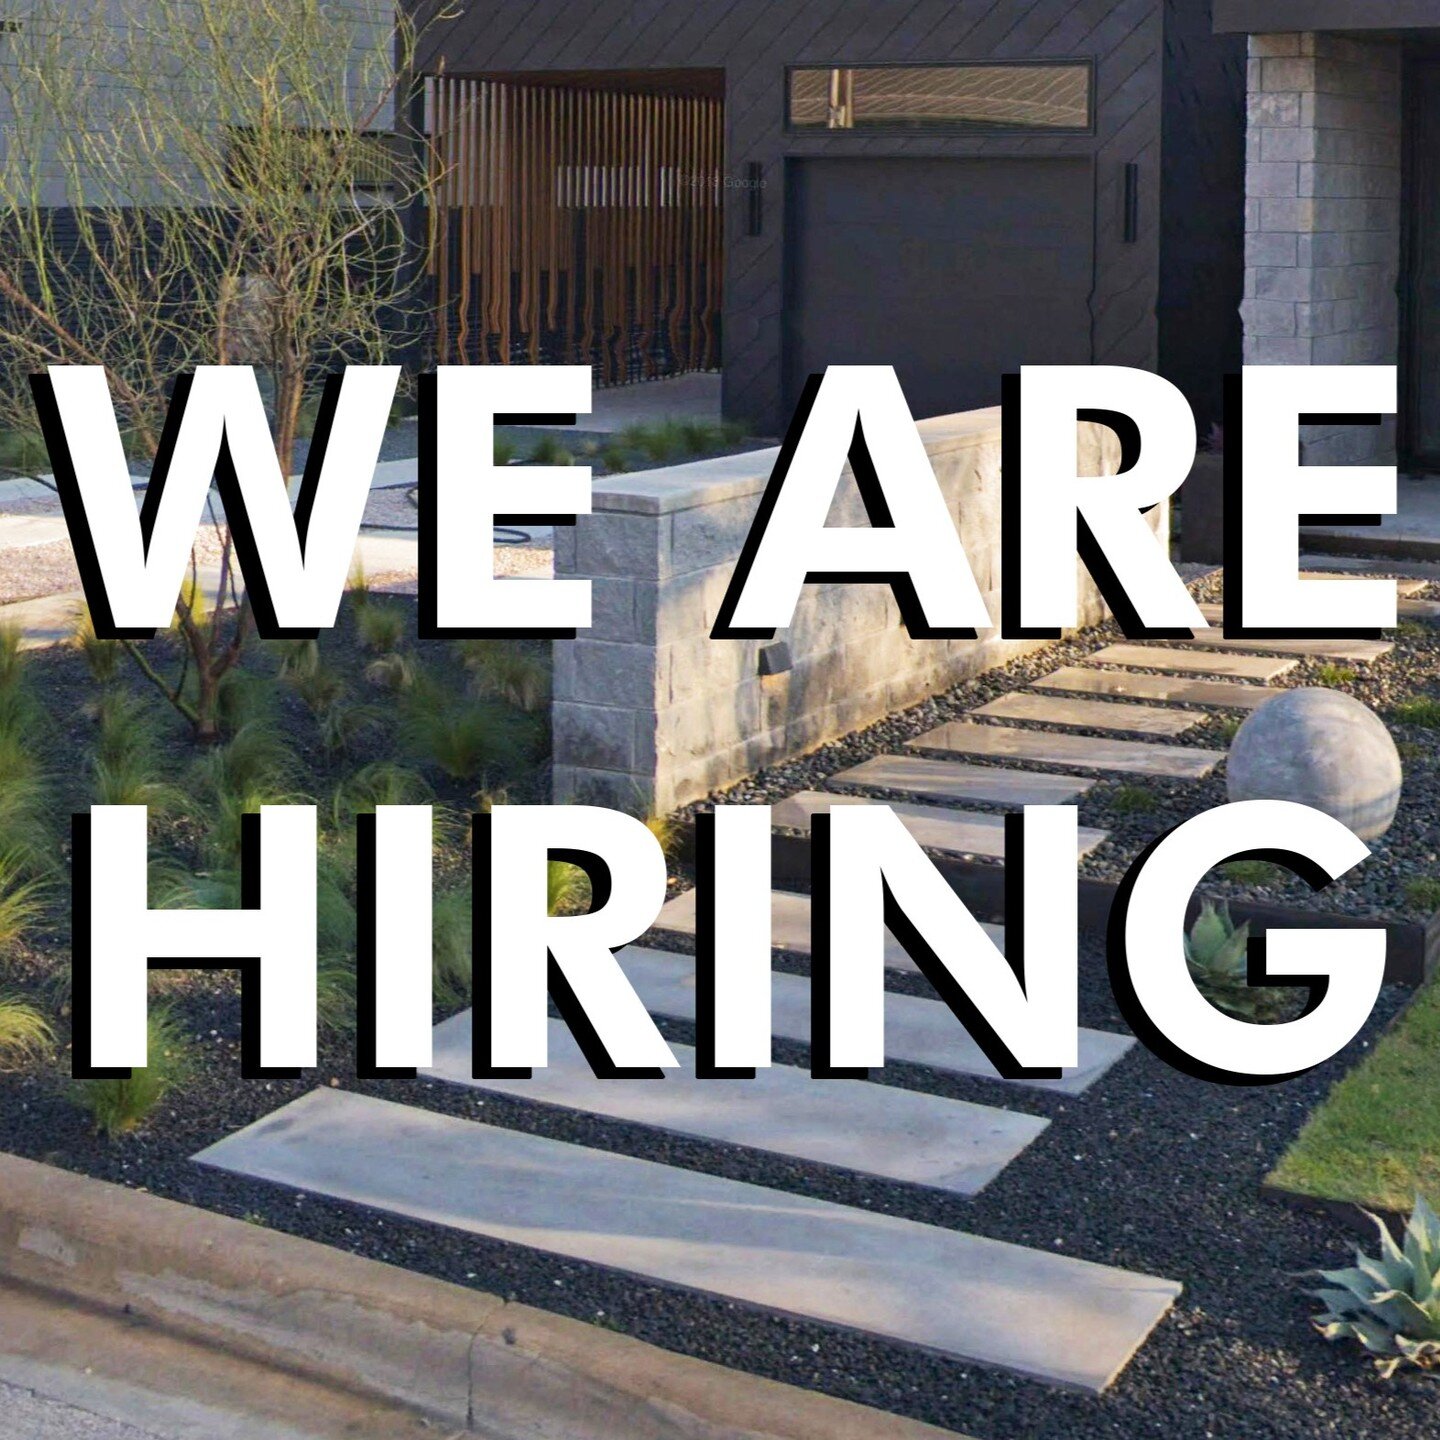 LSI is looking for a Landscape Architect!

Key Requirements Include:
-Degree in Landscape Architecture, Landscape Planning, or equivalent
-3 or more years of professional experience
-Proficiency in AutoCAD, Adobe Creative Cloud with experience in Ske